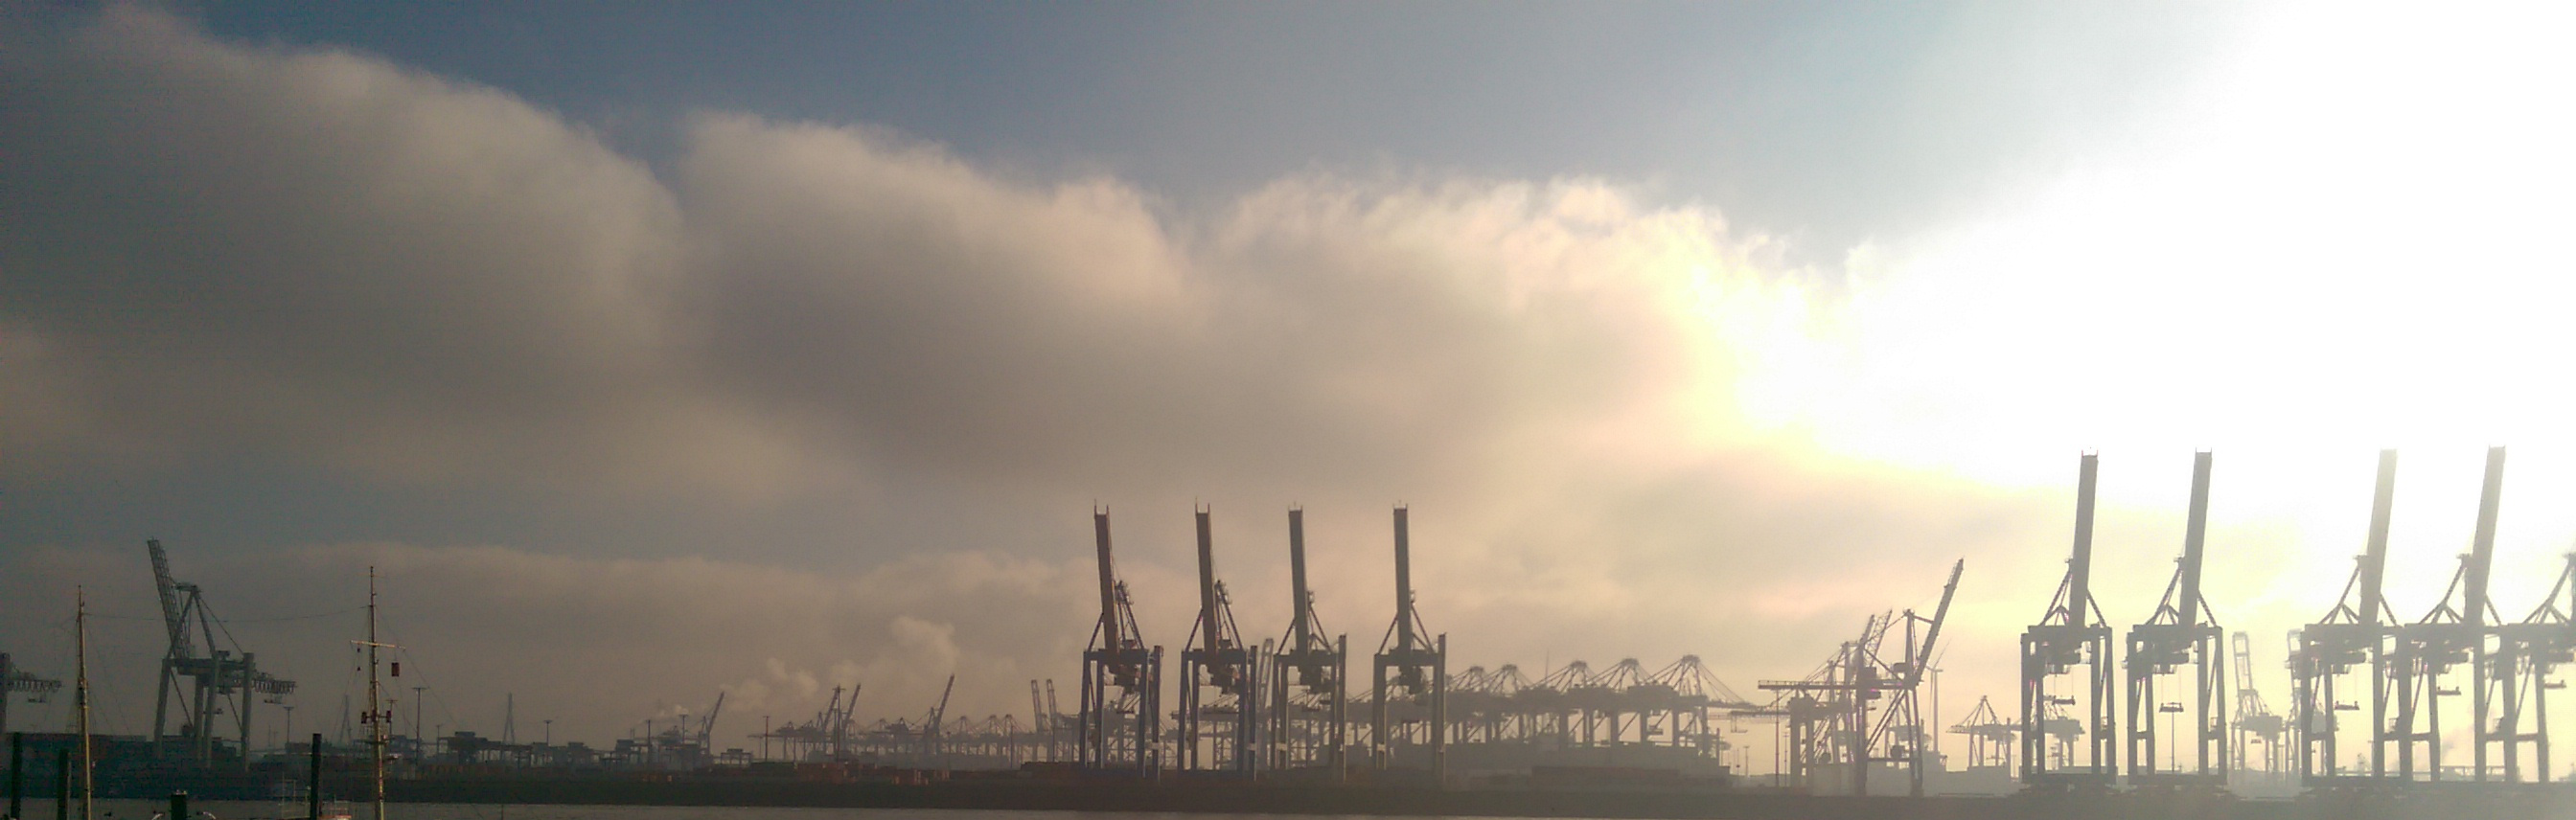 A bunch of cranes on a misty day